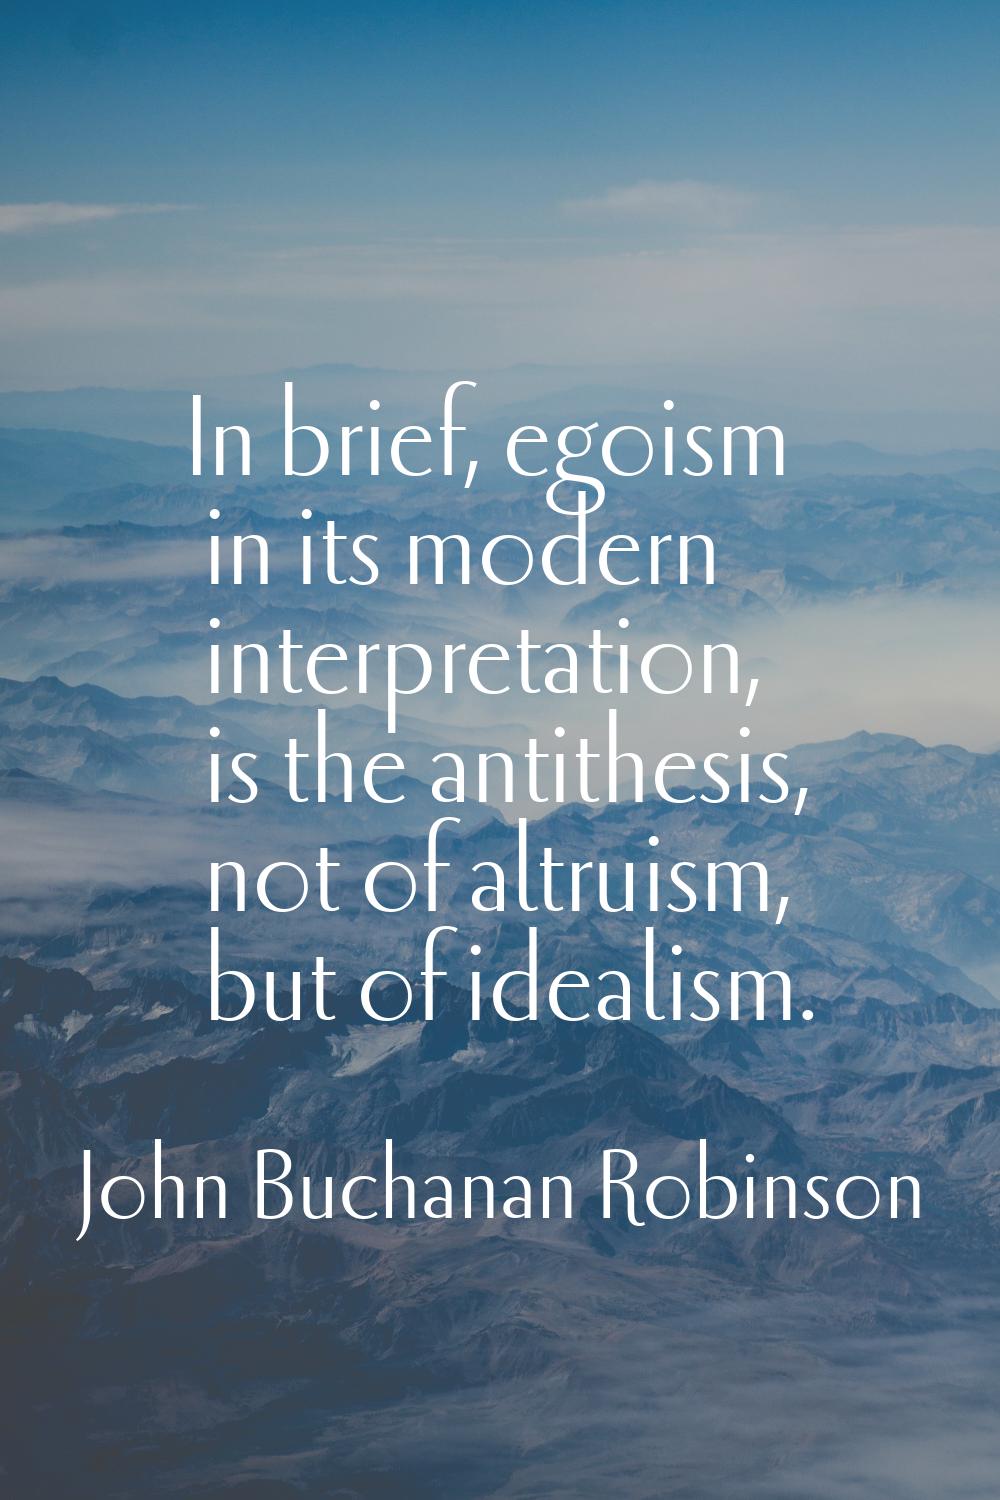 In brief, egoism in its modern interpretation, is the antithesis, not of altruism, but of idealism.